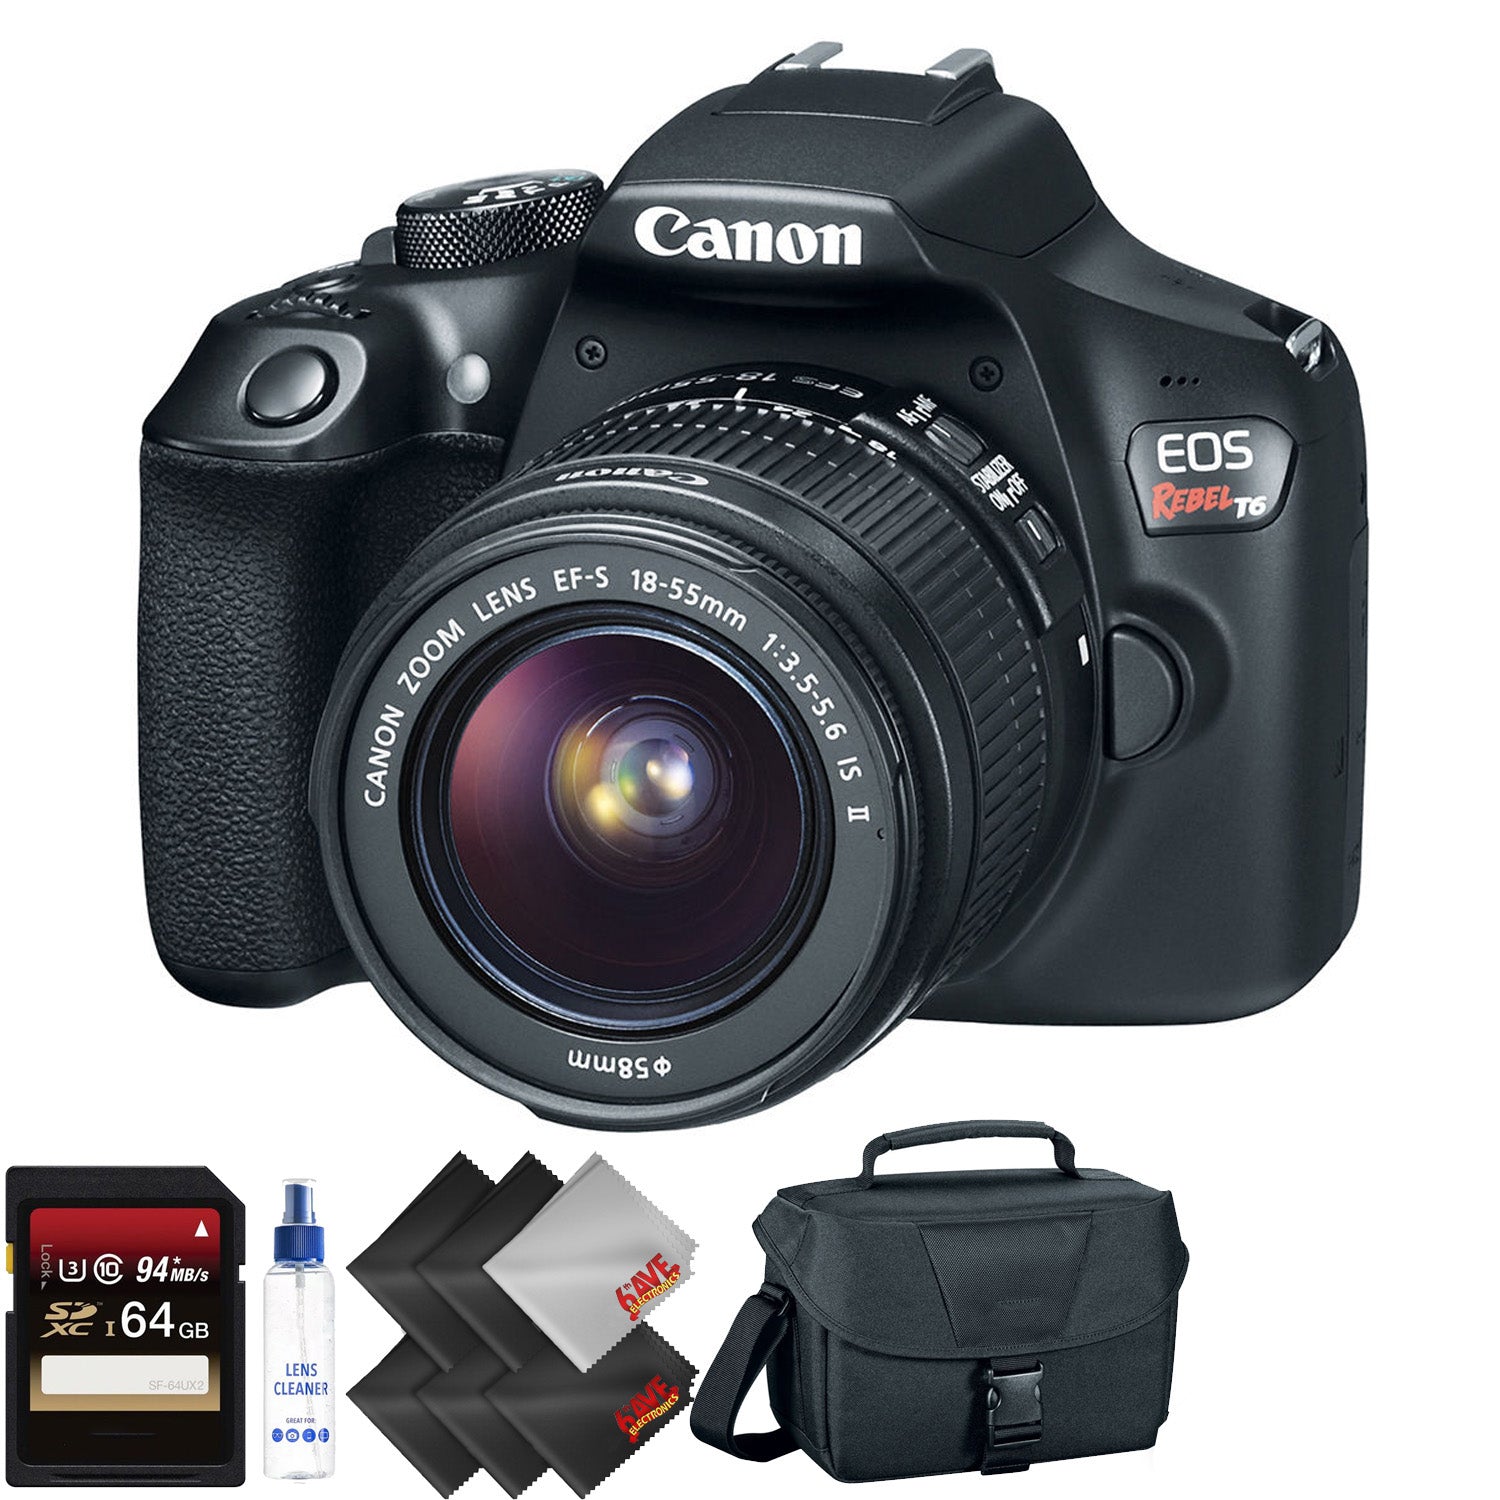 Canon EOS Rebel T6 DSLR Camera with 18-55mm Lens + 64GB Memory Card + 2 Year Accidental Warranty Bundle